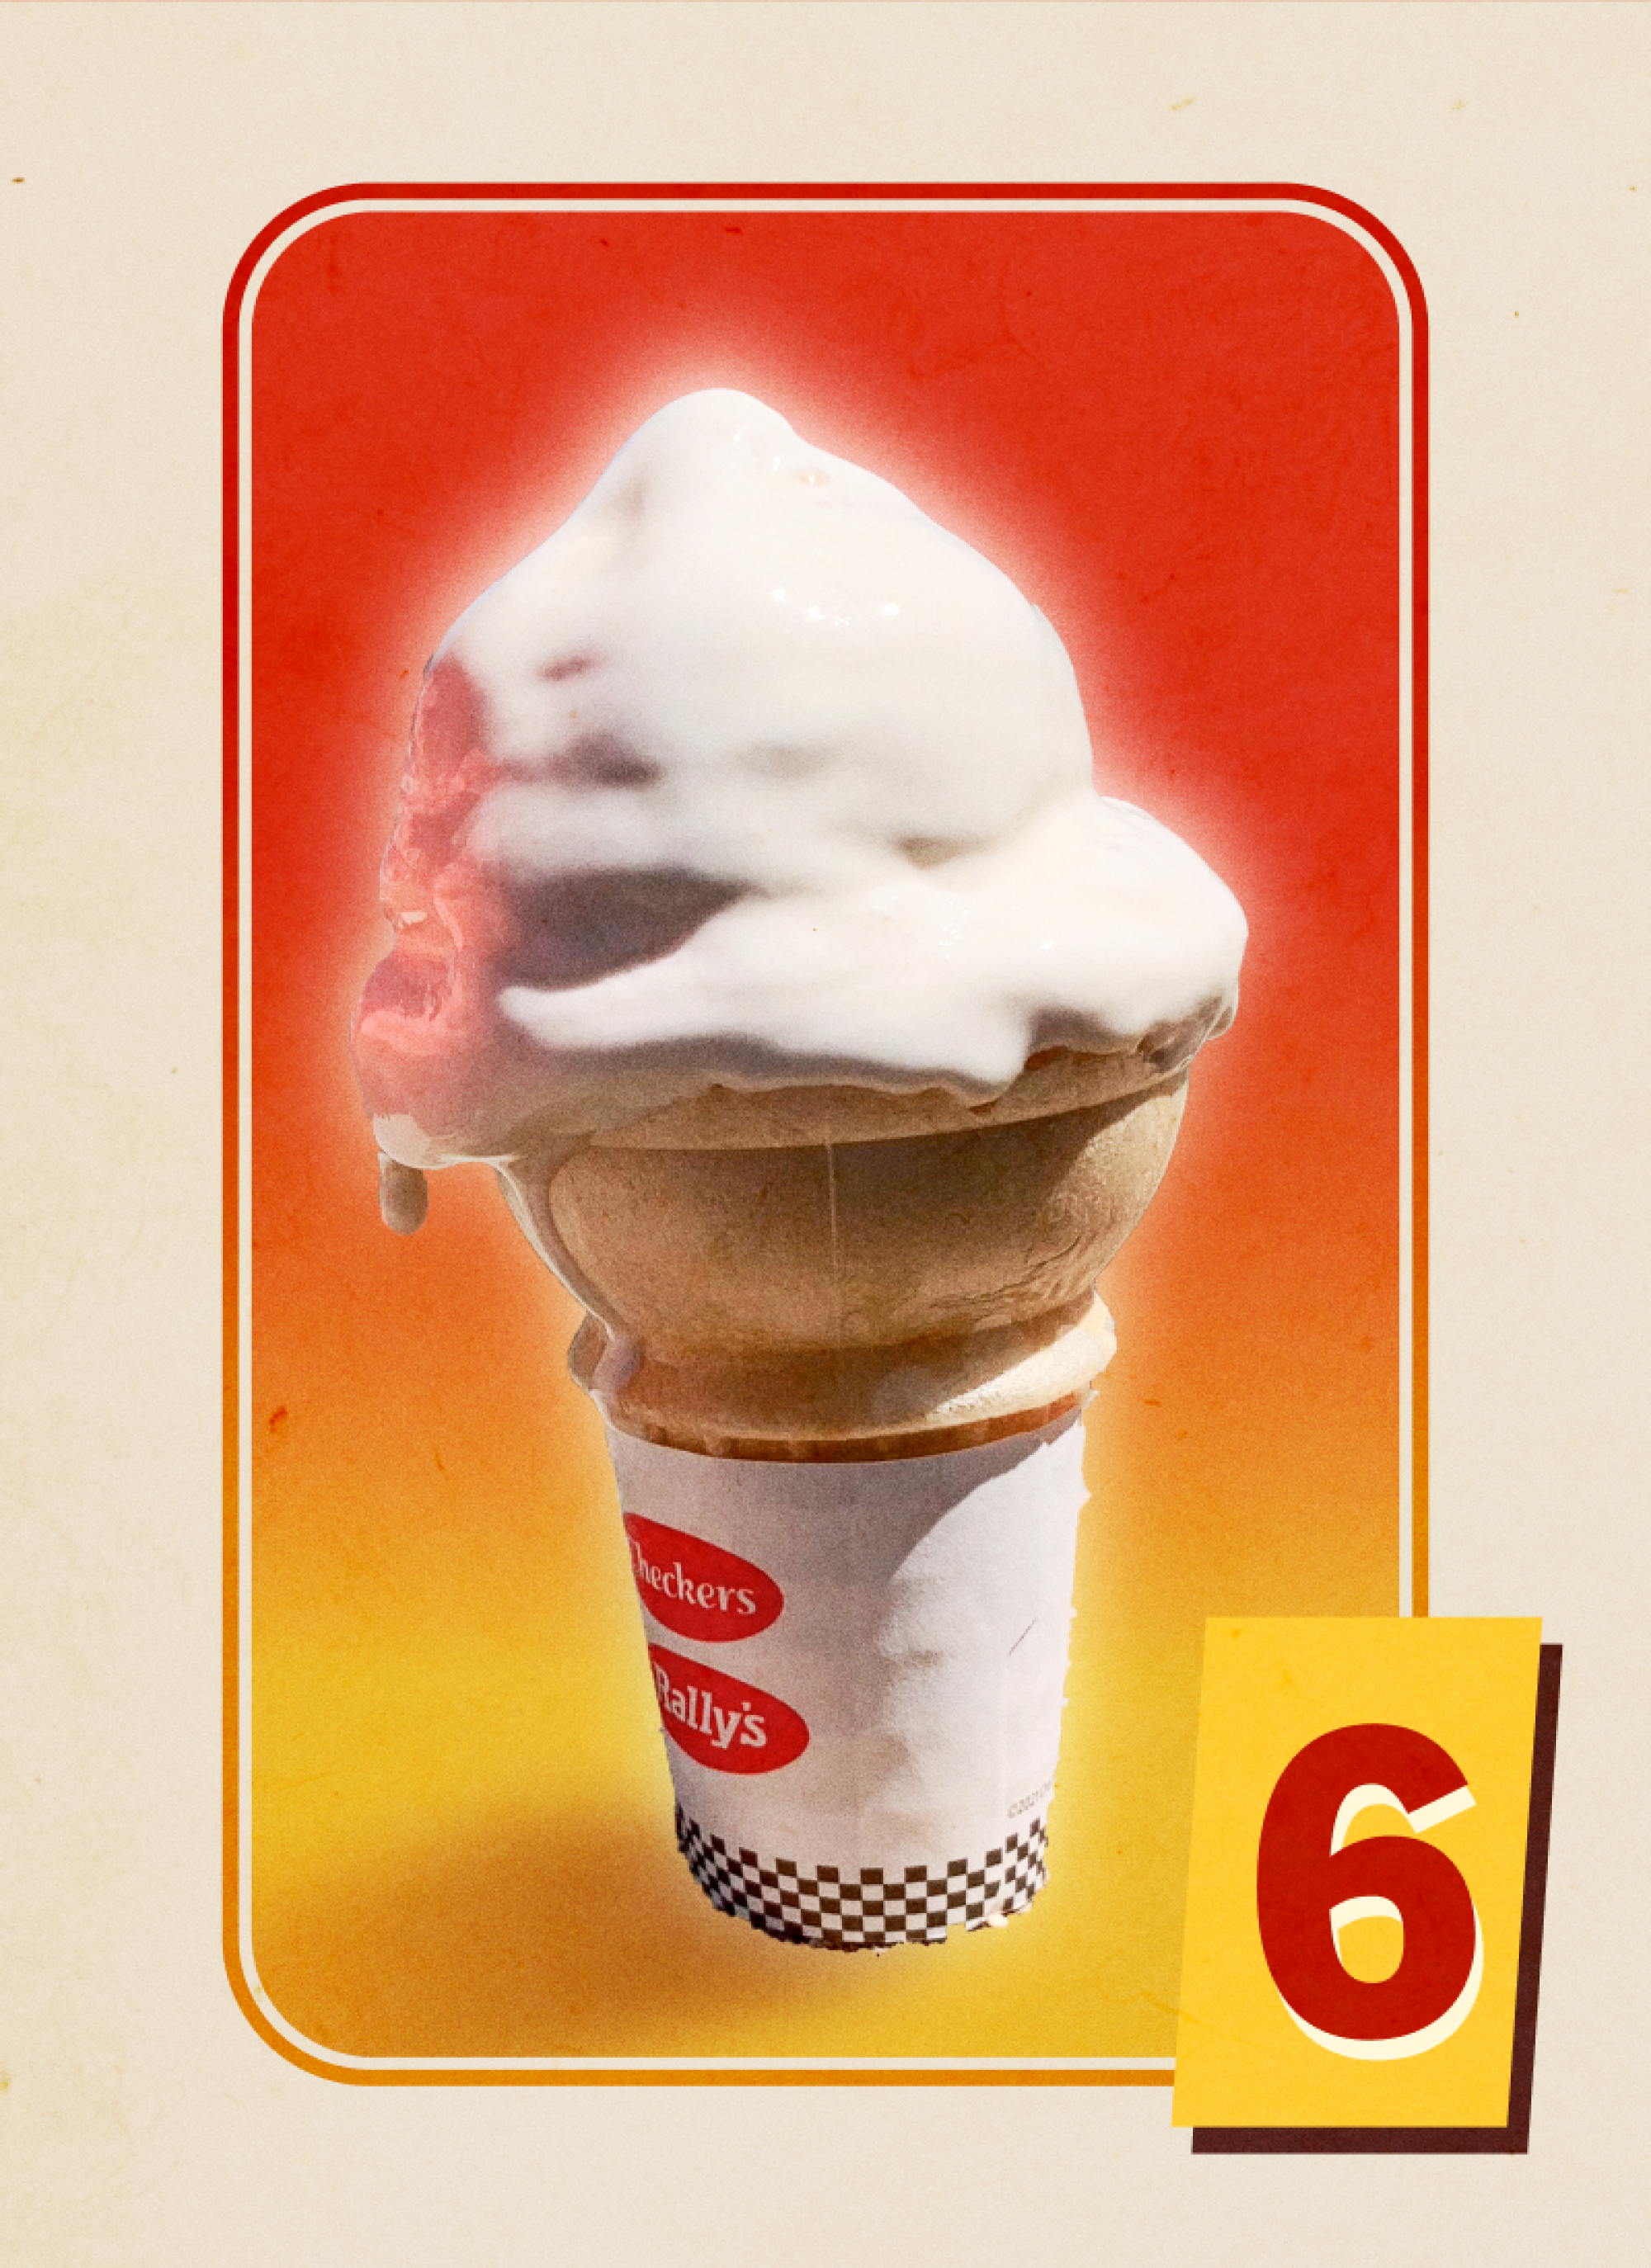 Graphic of Rally's soft serve